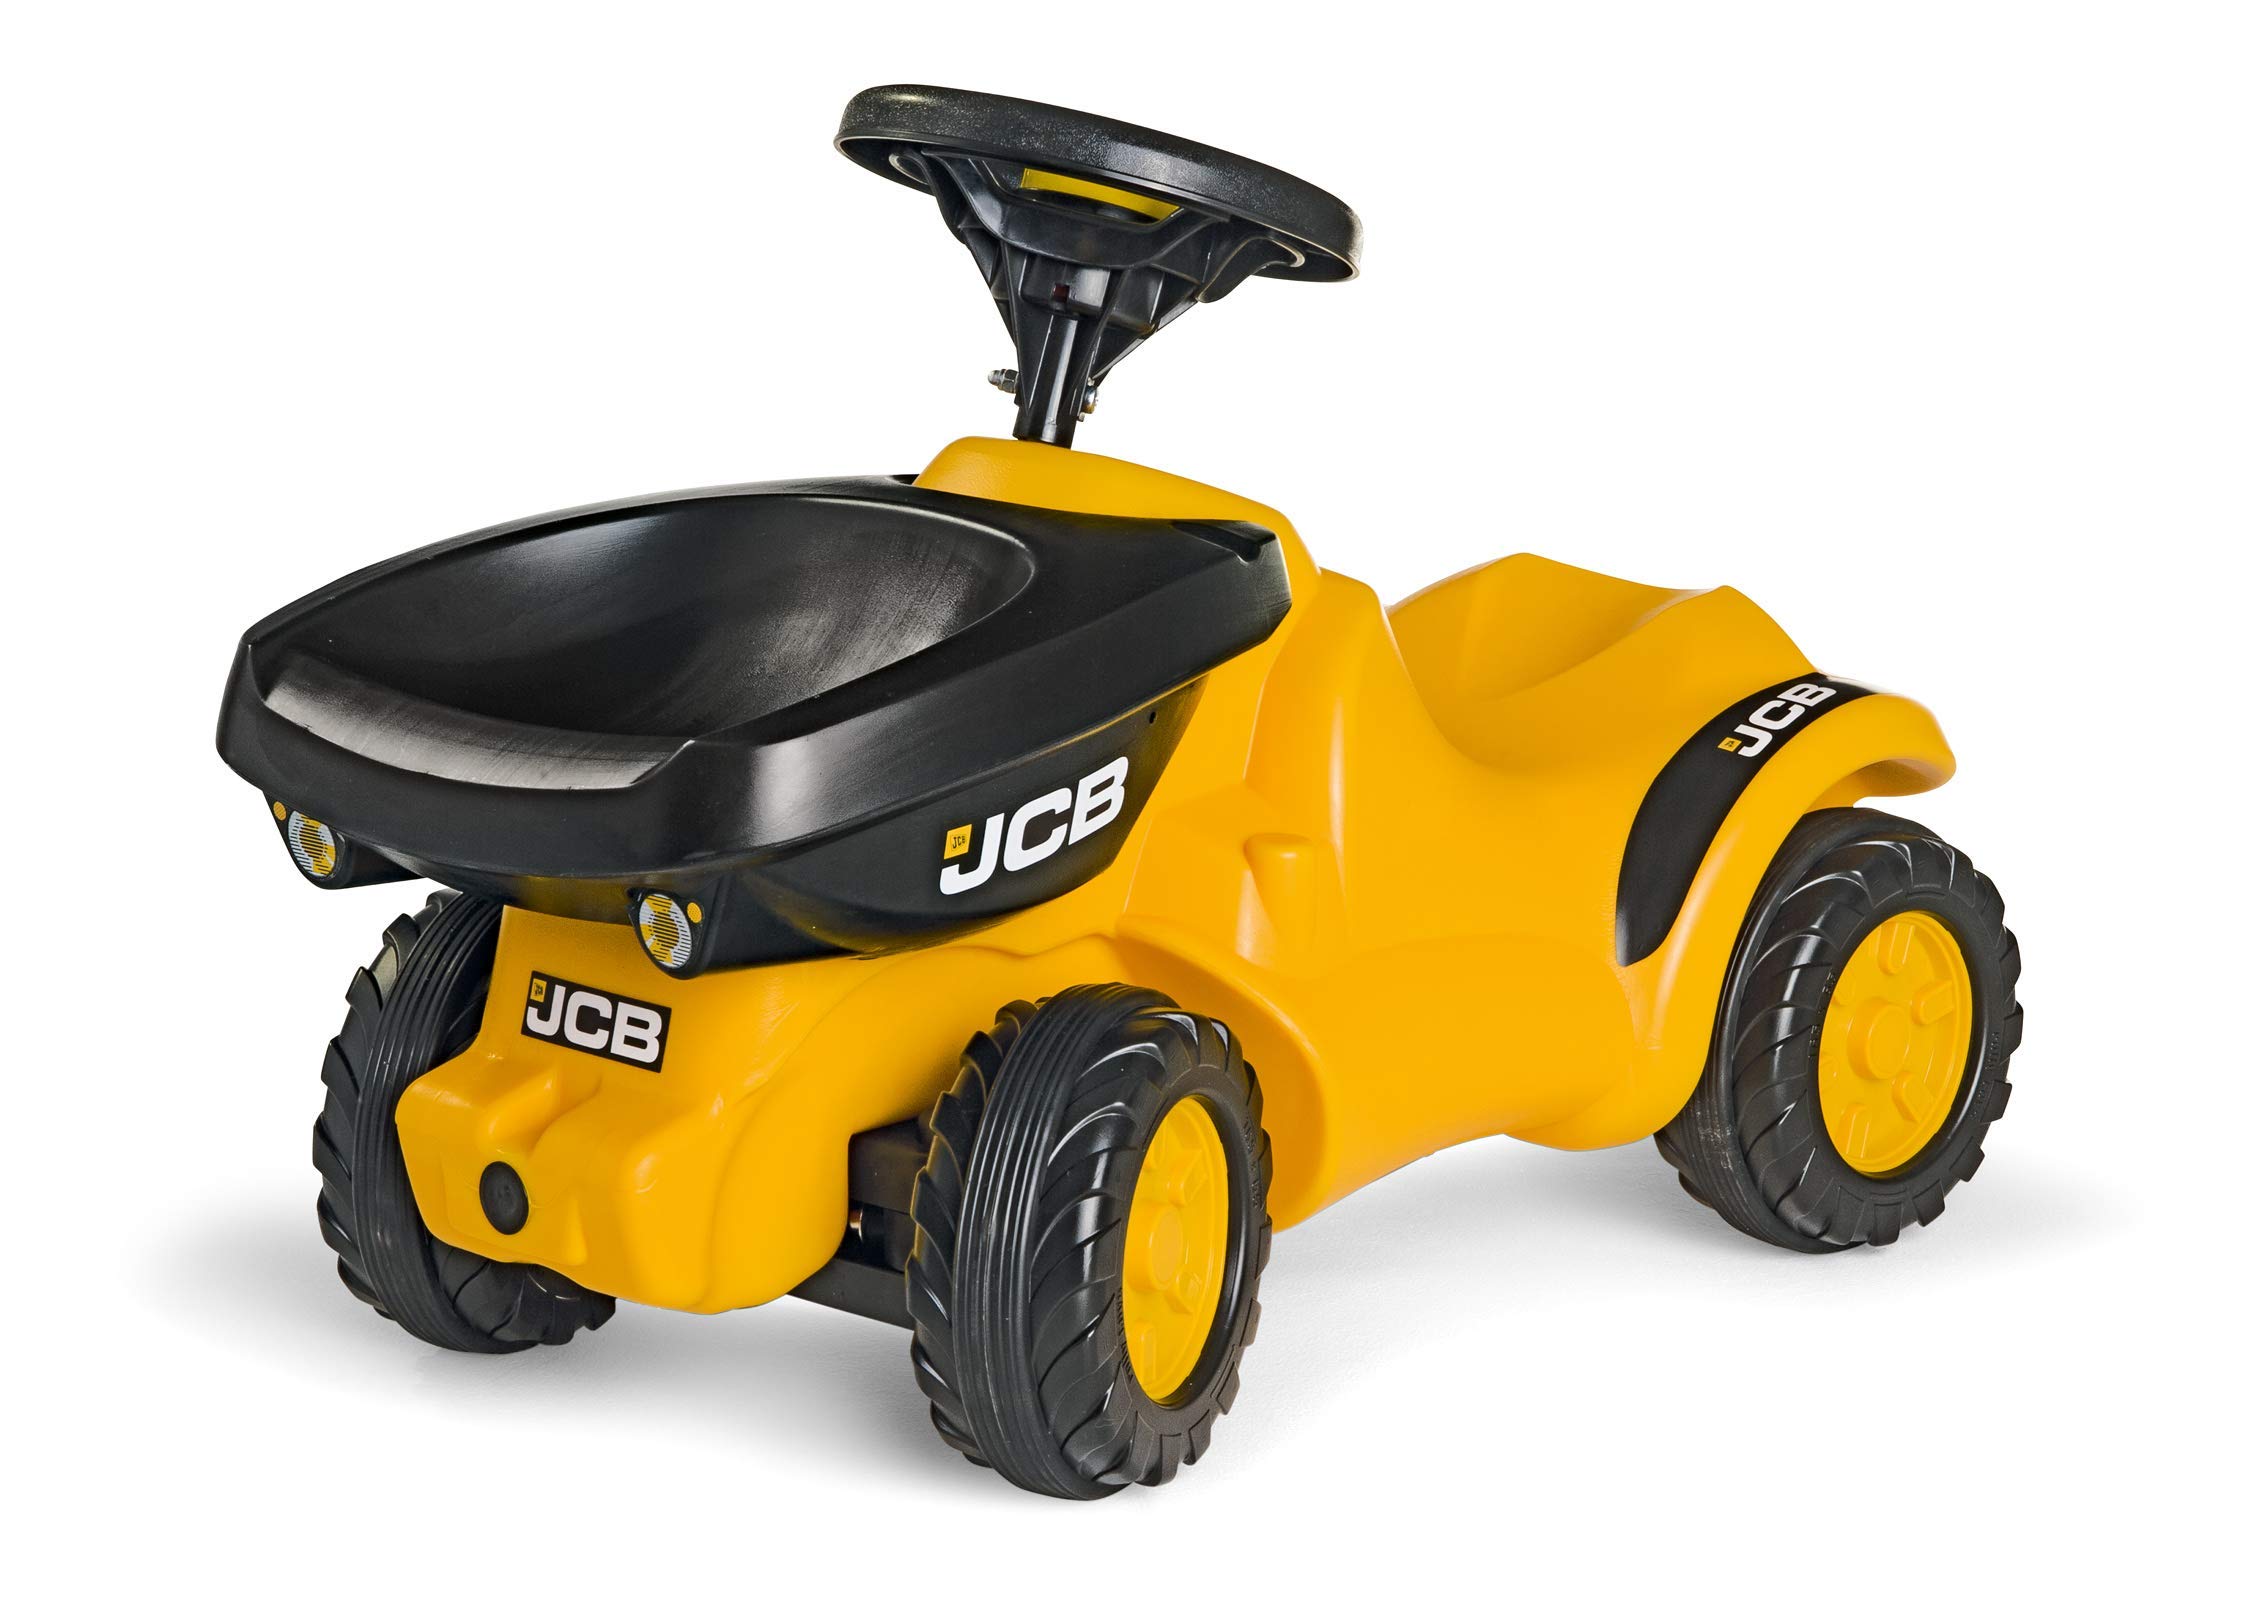 rolly toys | rollyMinitrac Dumper JCB | Minitrac Tractor with Squeaky horn and Tipping Dumper | 135646, Yellow, 63.0 x 41.0 x 30.0 cm